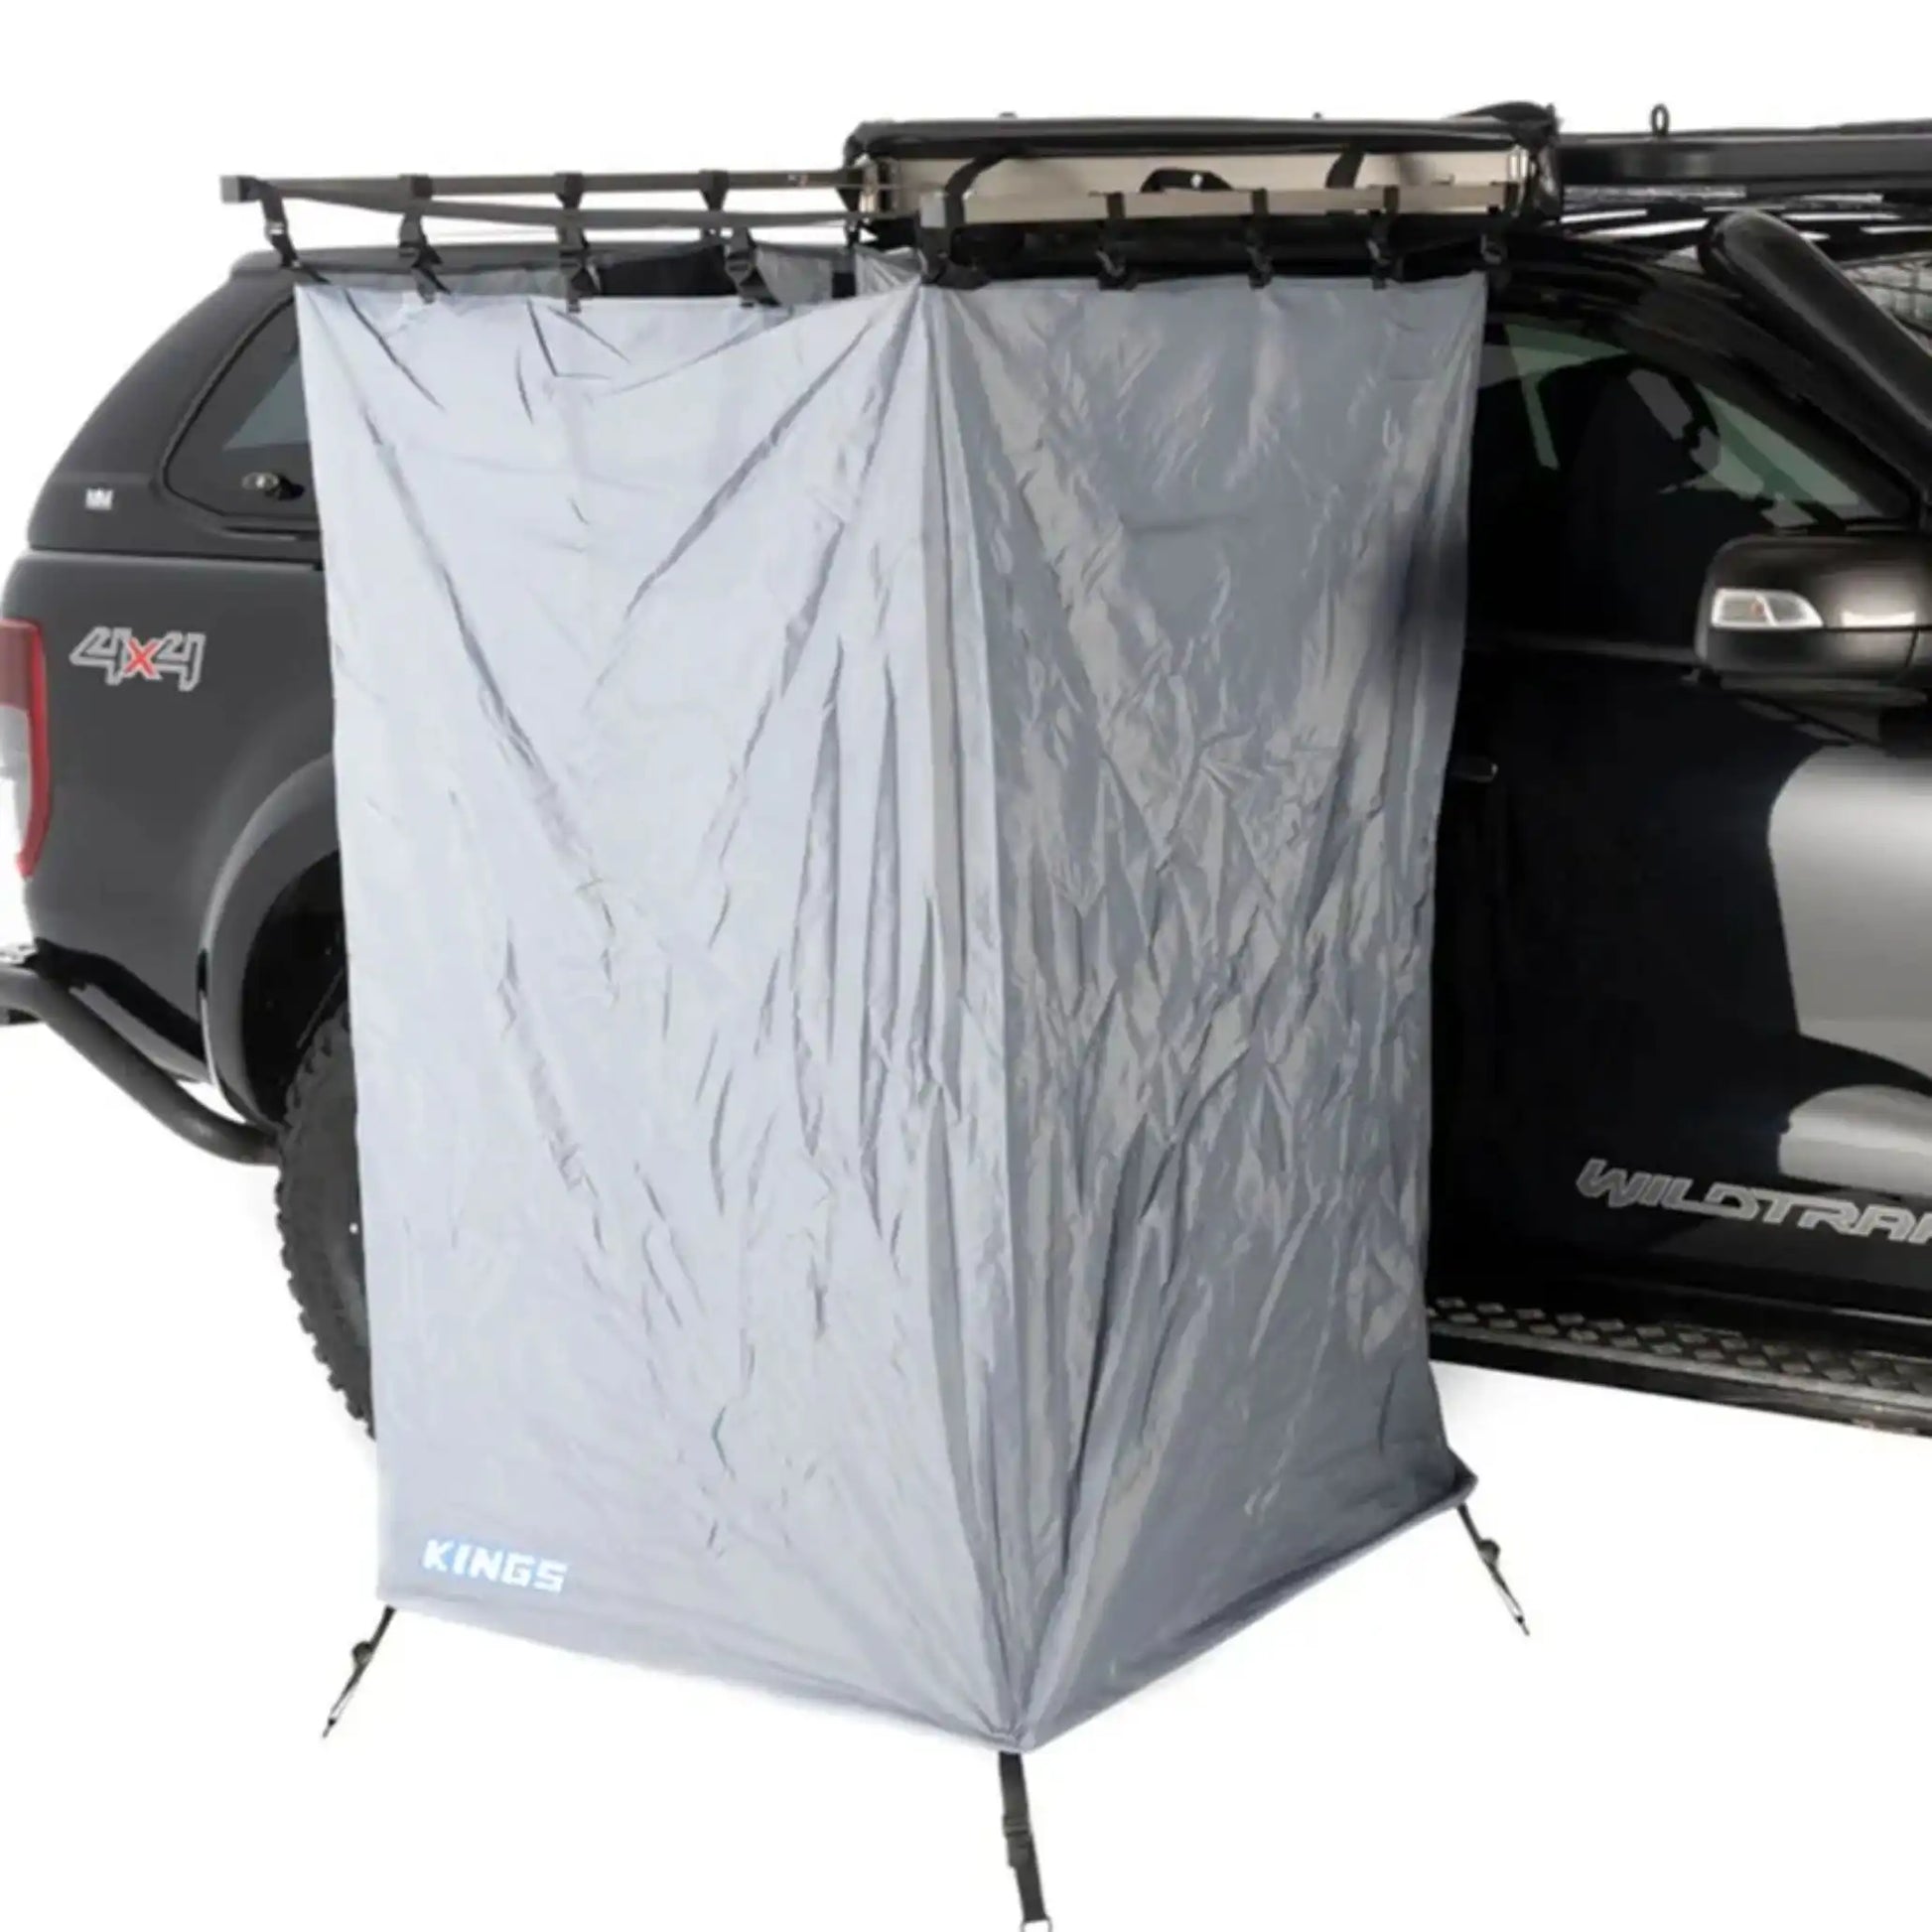 Kings Instant Ensuite Awning Shower Tent 